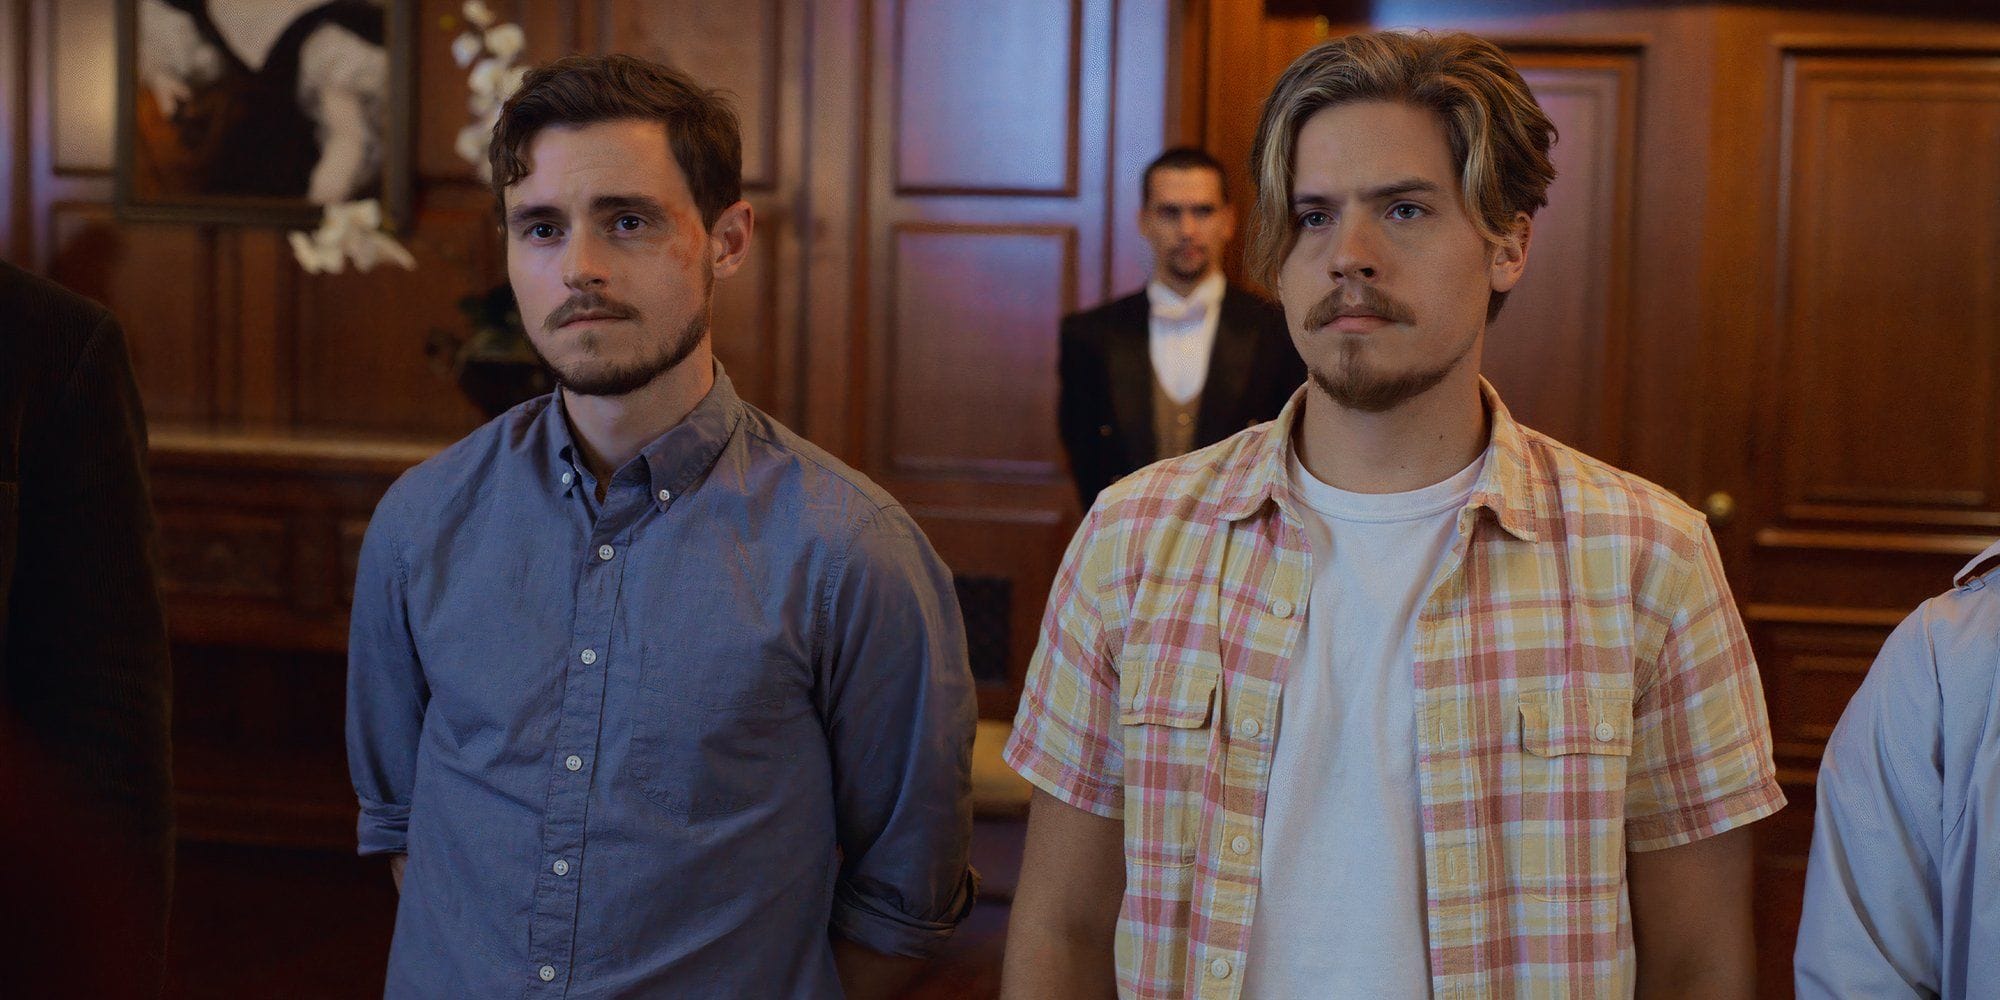 Dylan Sprouse’s Dramedy The Duel Hits Theaters with Star-Studded Cast